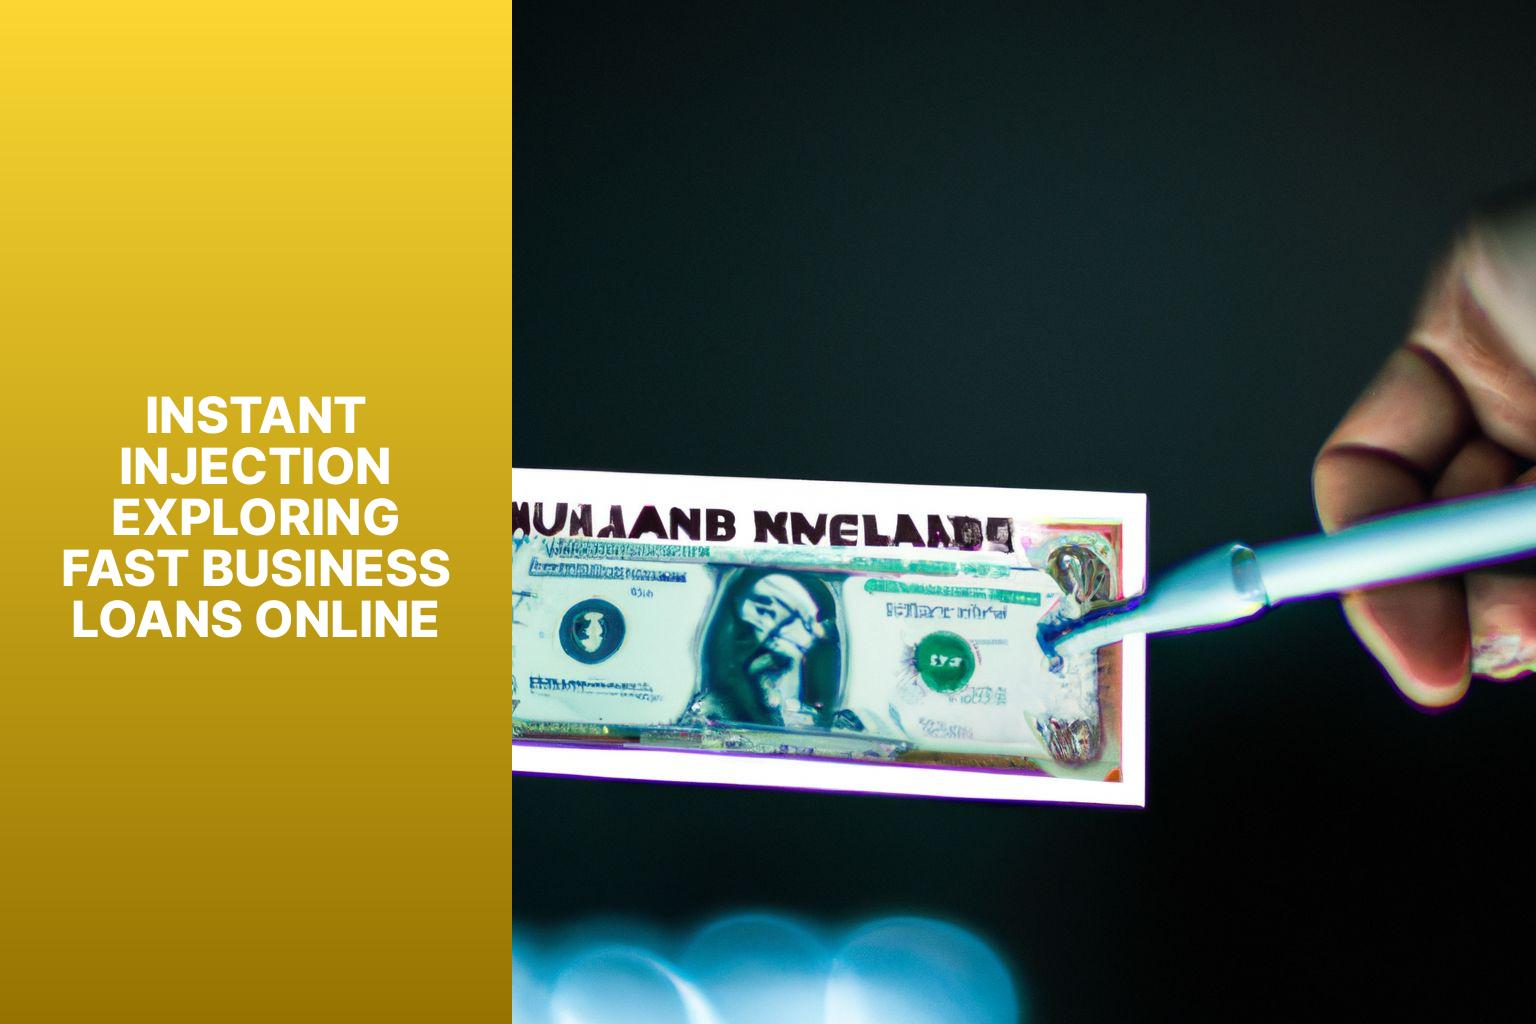 Instant Injection Exploring Fast Business Loans Online